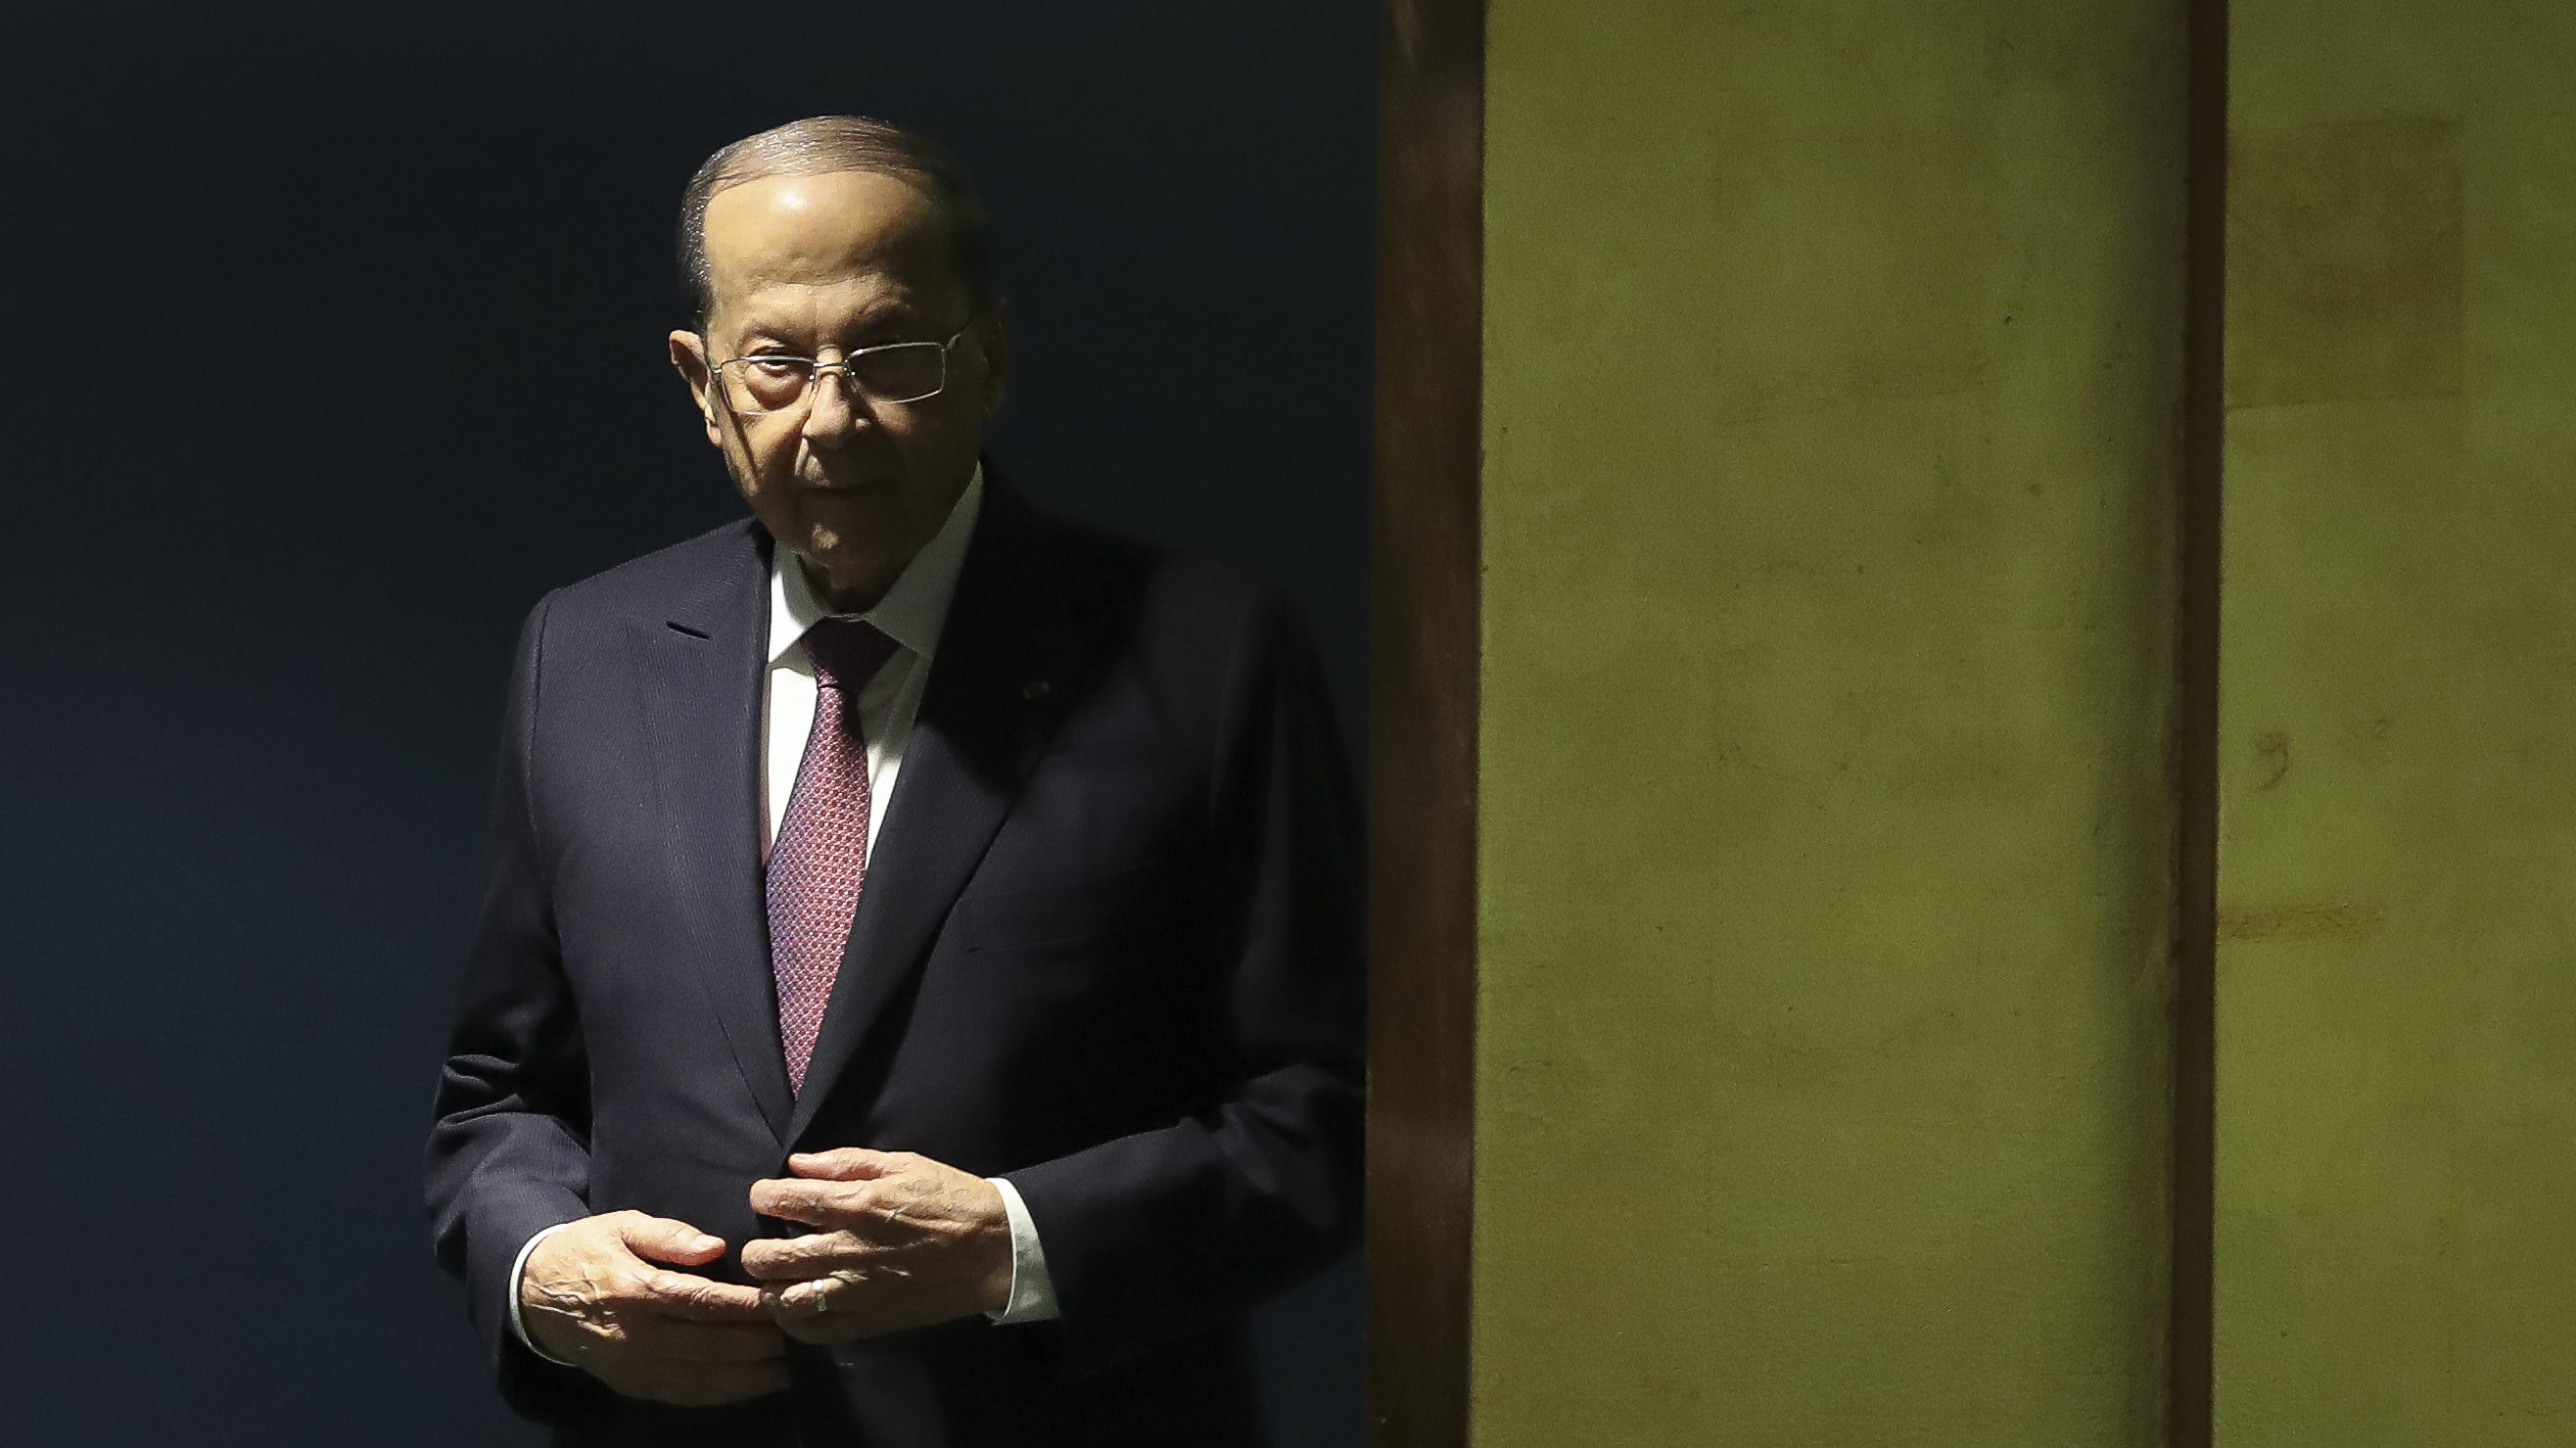 Lebanon’s President Hopes New Government Will Be Formed Quickly